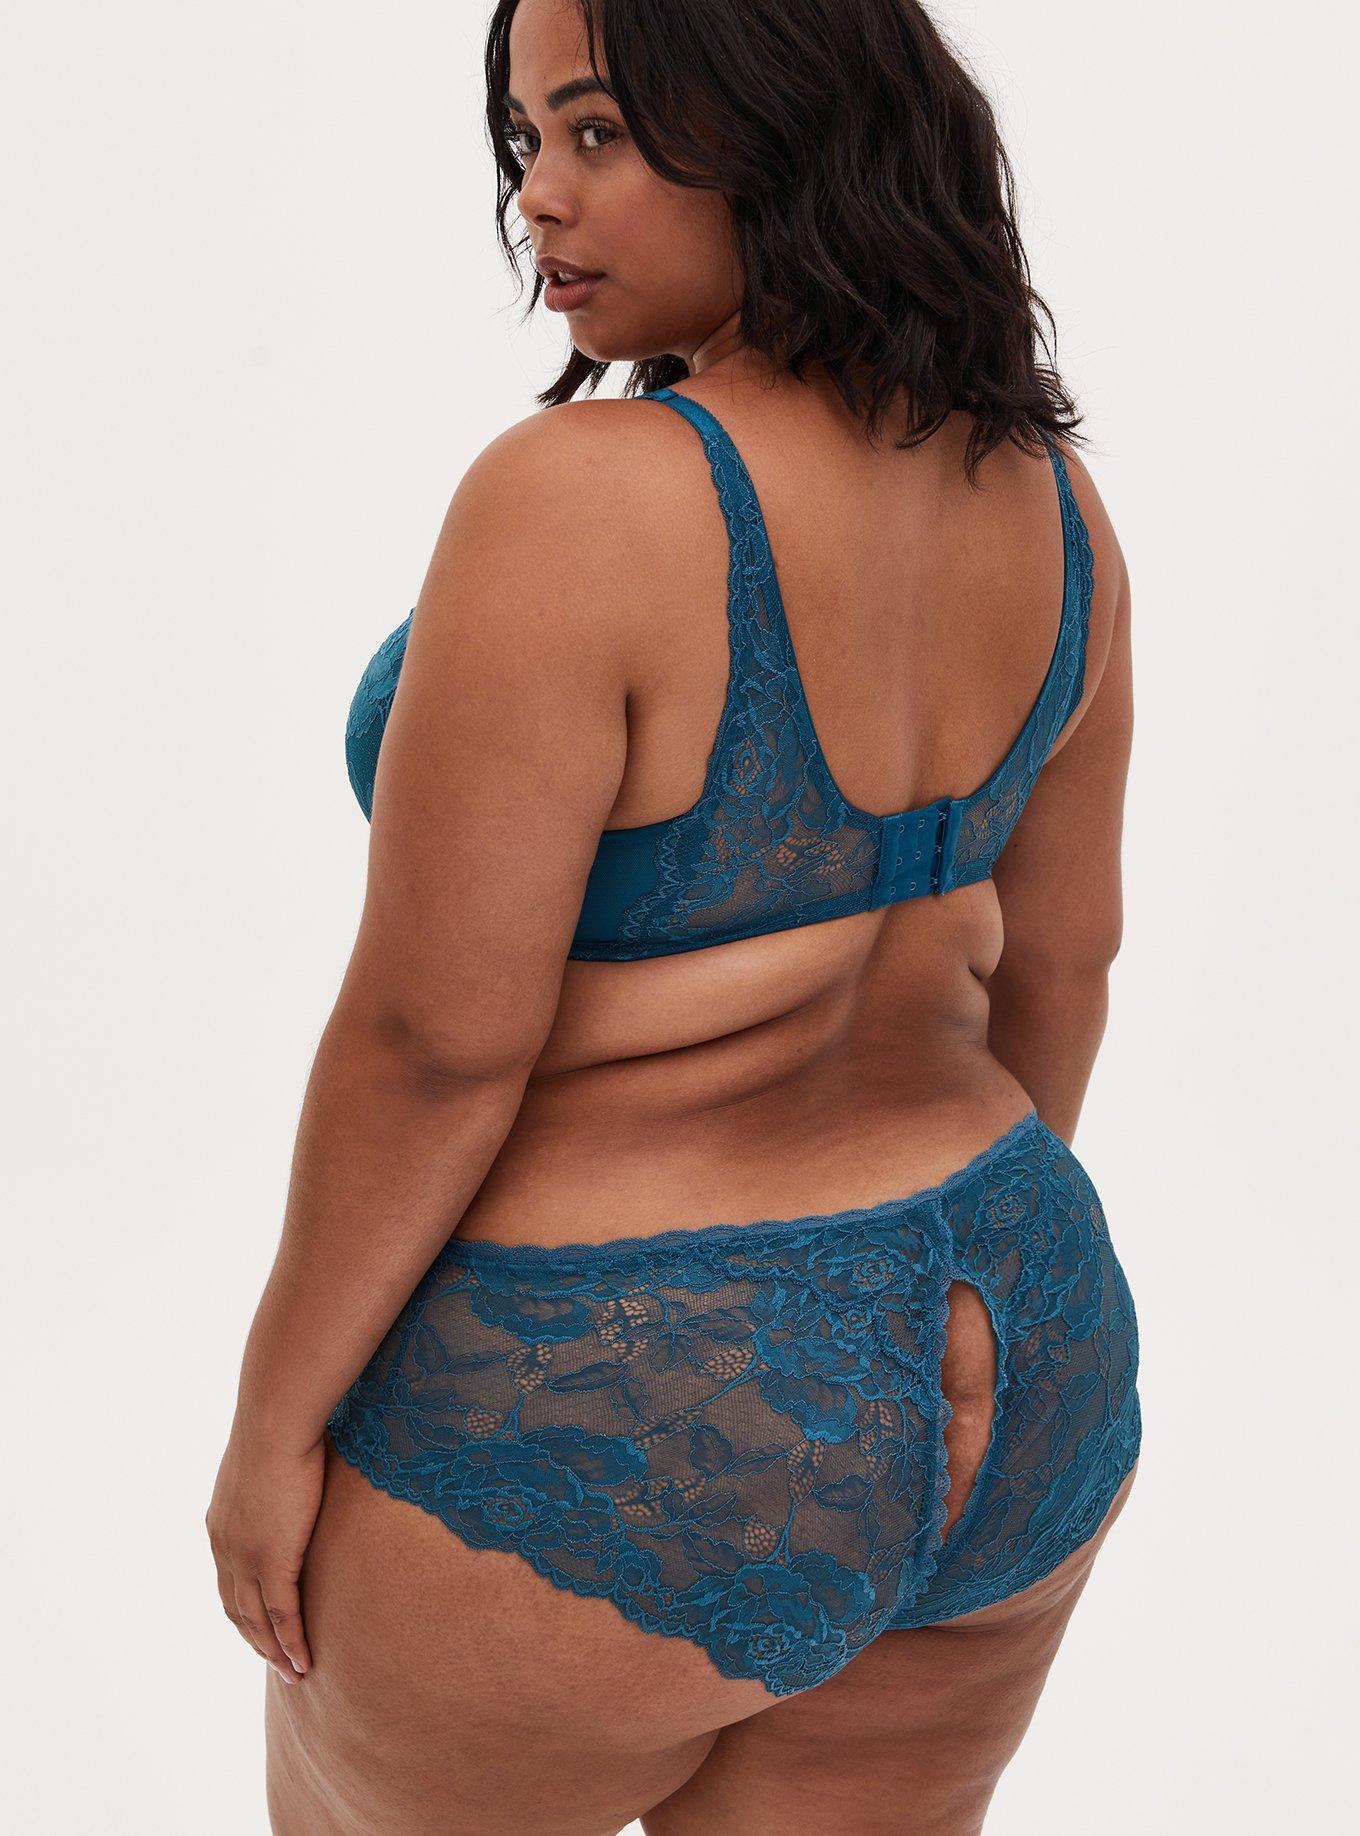 torrid, Intimates & Sleepwear, 2for3 Torrid Floral Lace Cheeky Panty  Underwear With Open Back Slit 3x